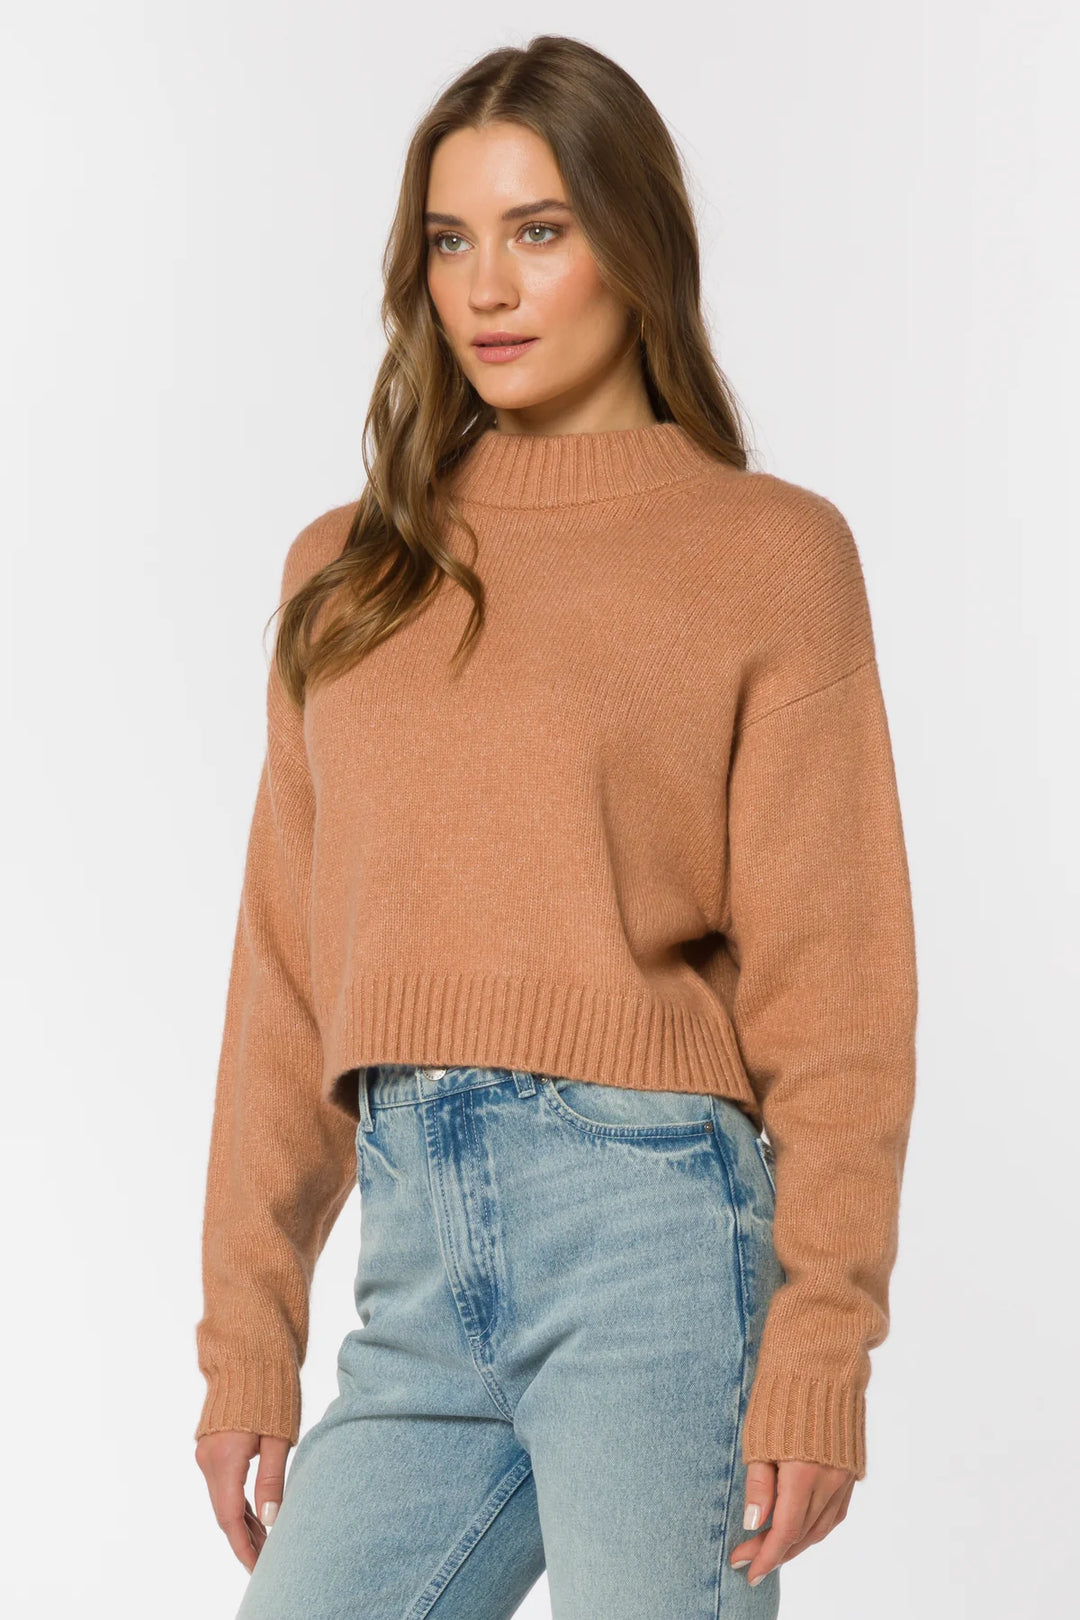 WHITLEY MAPLE SWEATER